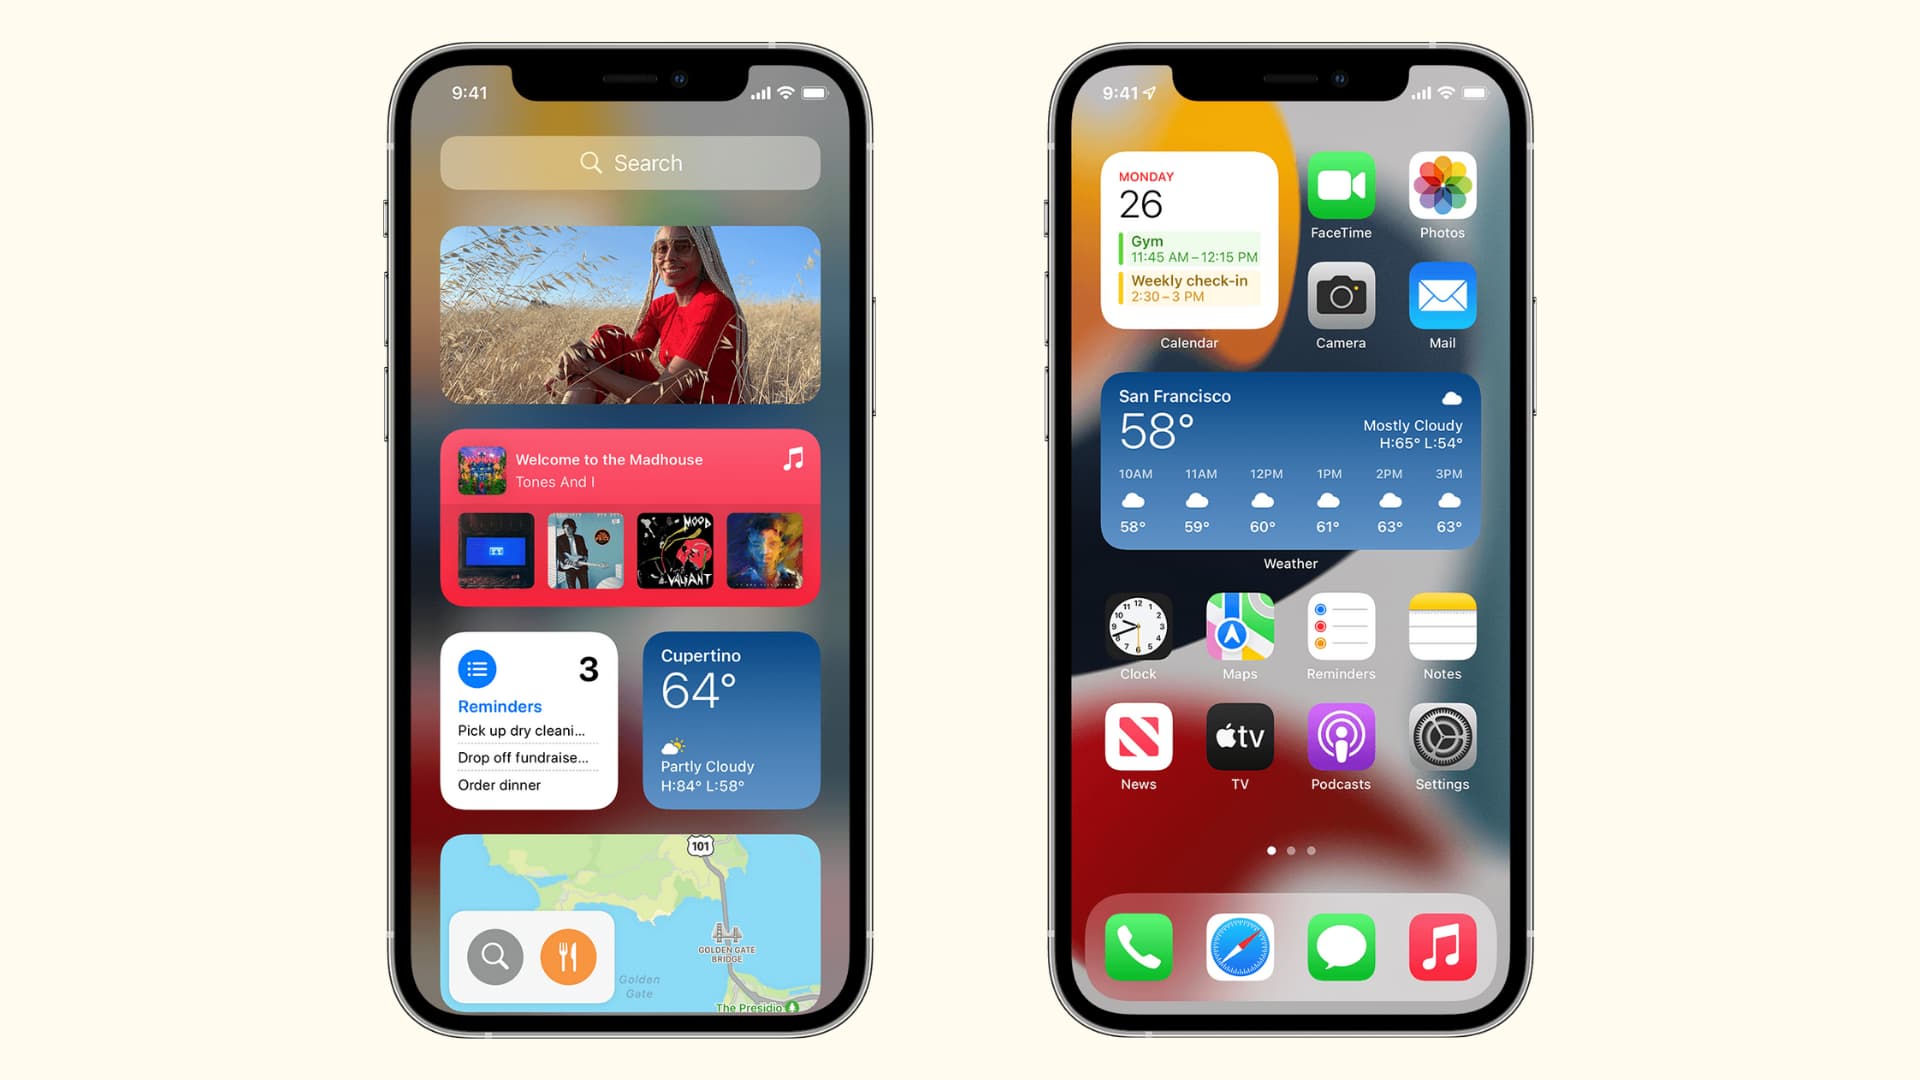 Two iPhone images showing iOS widgets on the Home Screen and Today View